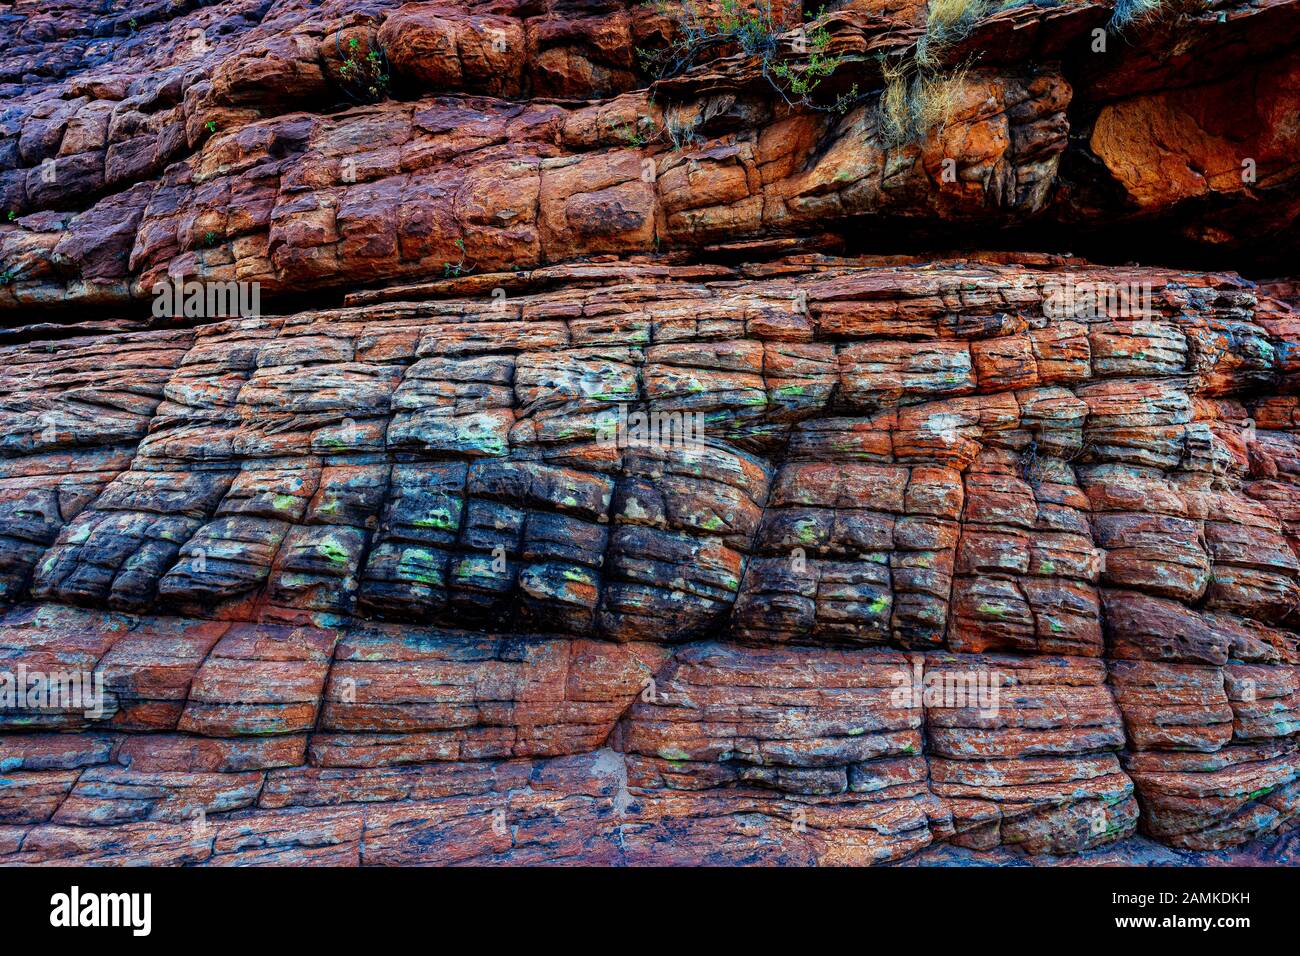 Cross-bedding in the beehive-like domes at Kings Canyon. This is evidence that the Mereenie Sandstone was originally sand dunes. Stock Photo